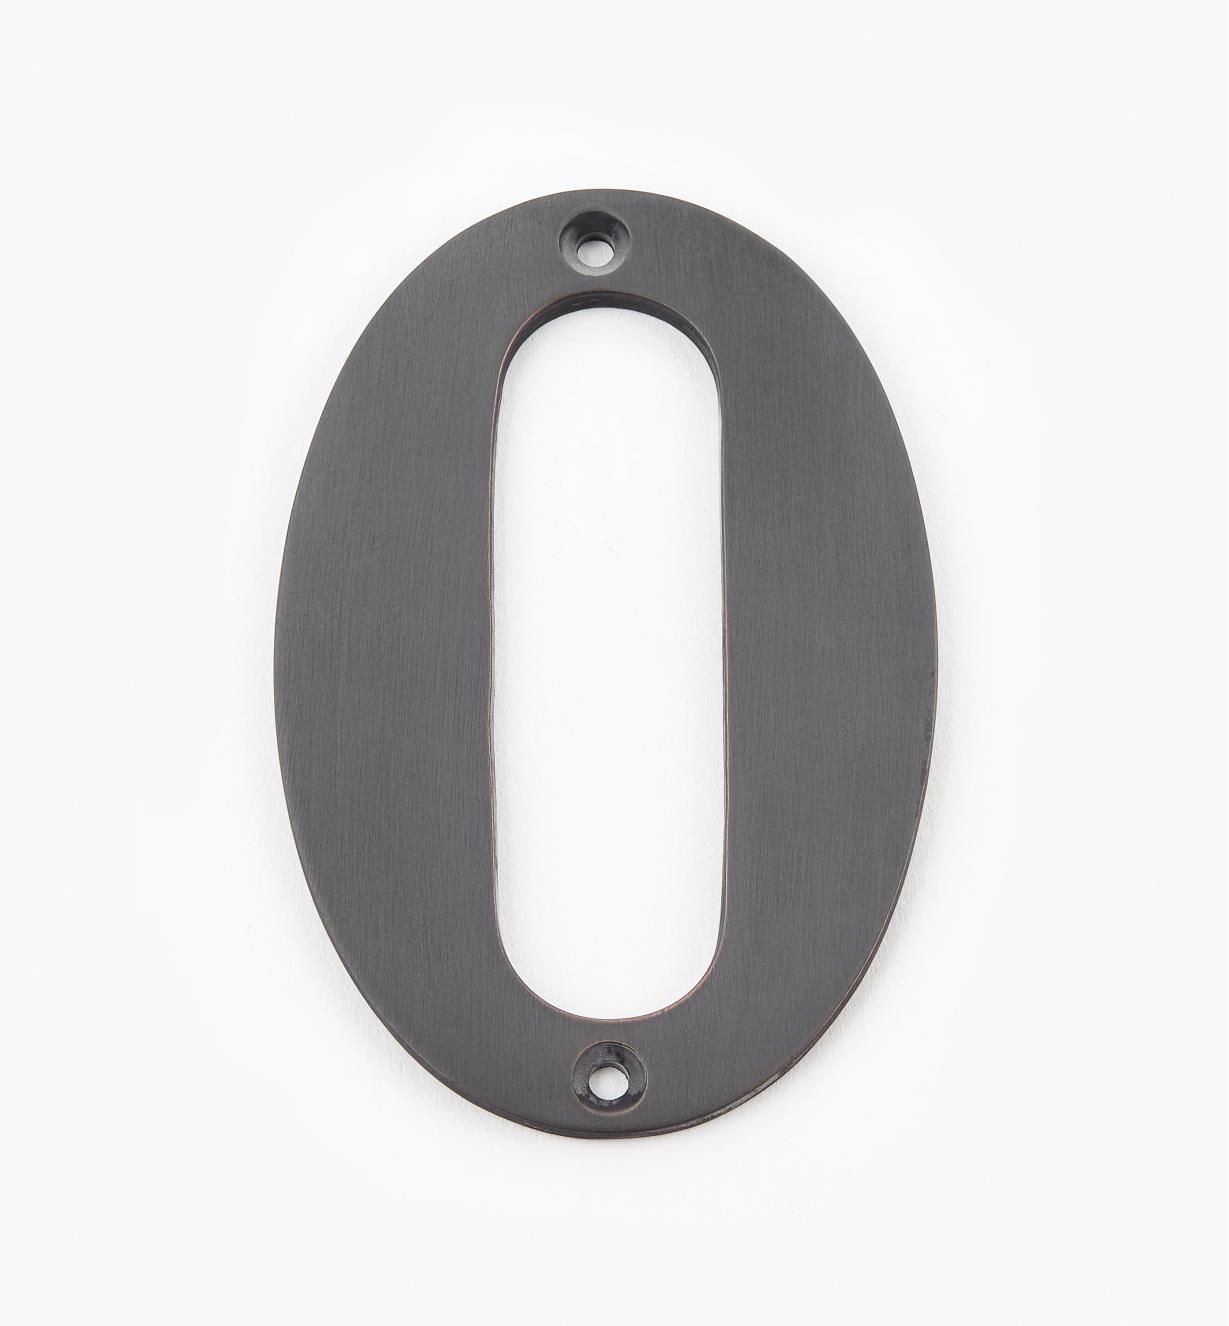 00W0570 - 4" Standard Oil-Rubbed Bronze Number - 0